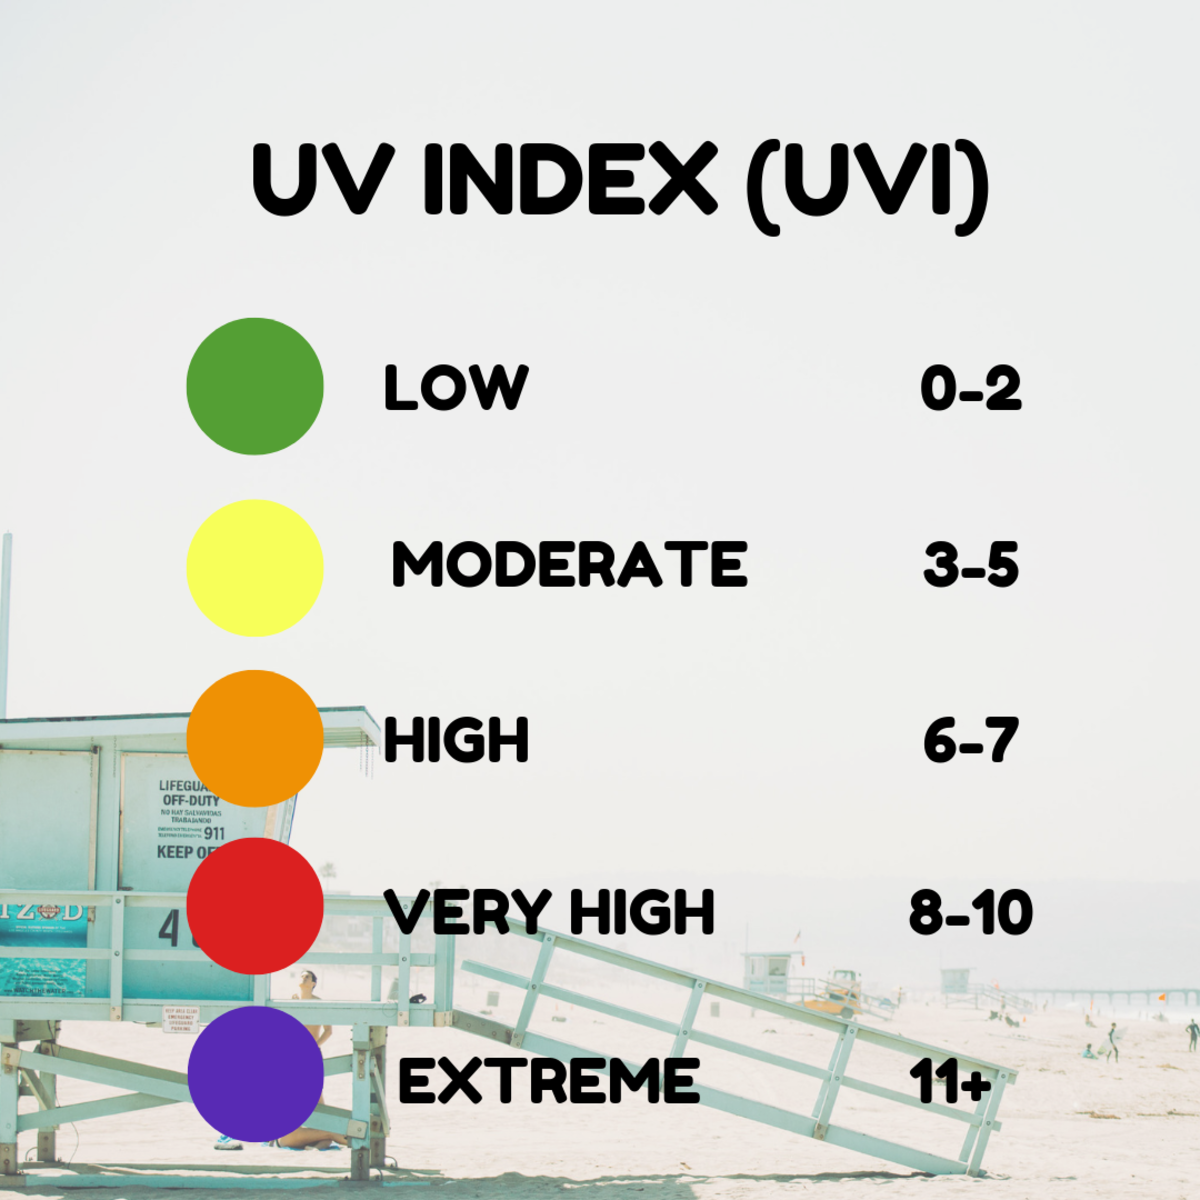 The higher the UVI rating, the more dangerous it is to go outside and expose yourself to the sun's rays.